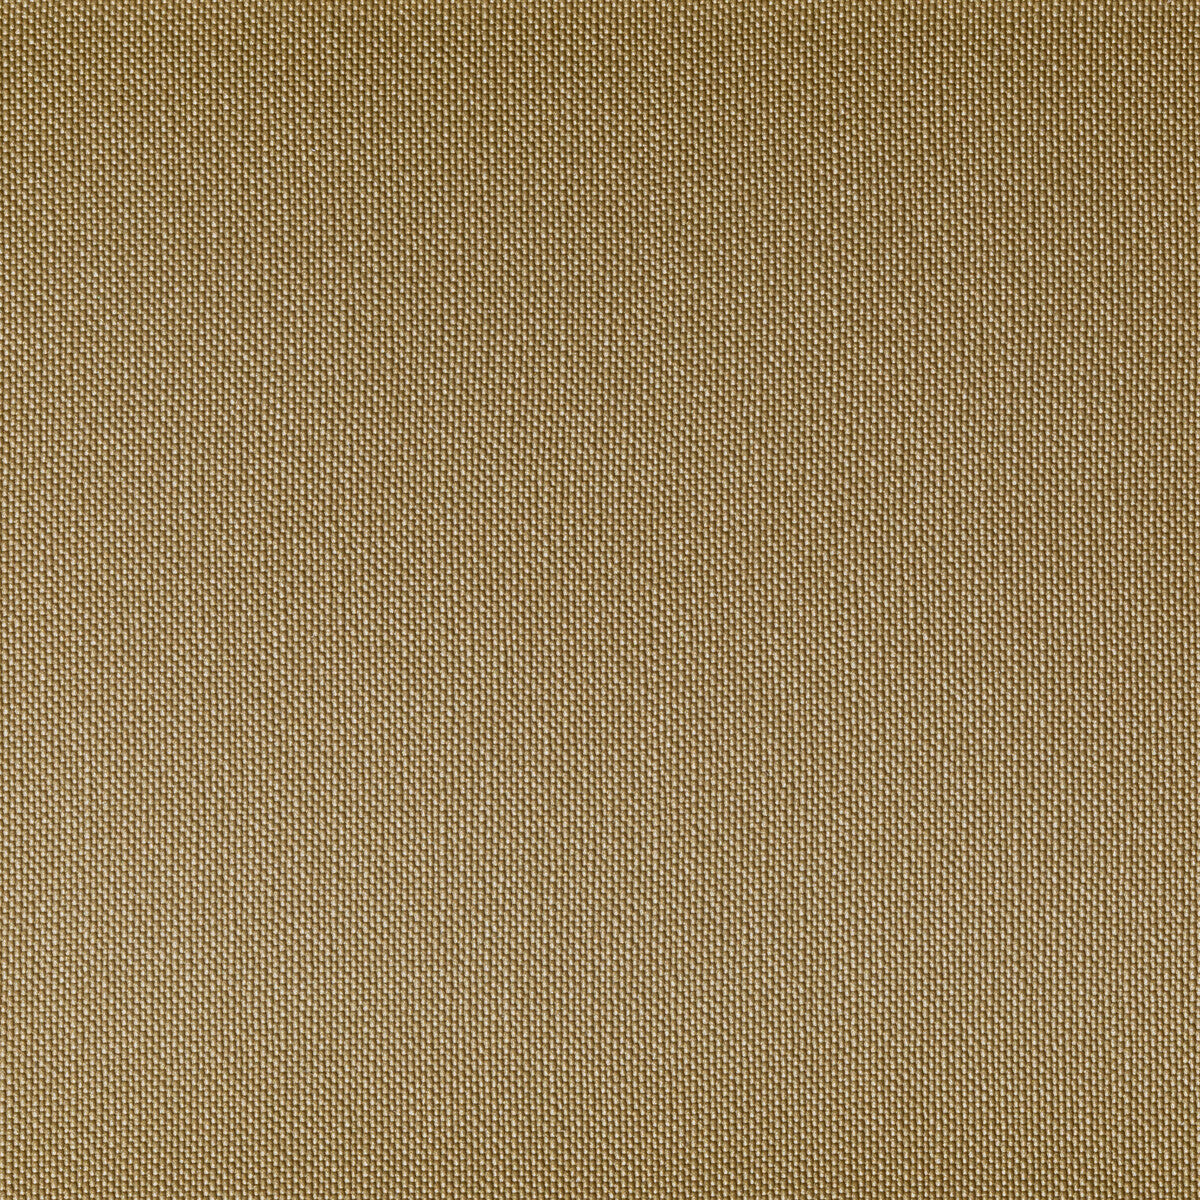 Ventura fabric in miso color - pattern VENTURA.16.0 - by Kravet Contract in the Foundations / Value collection